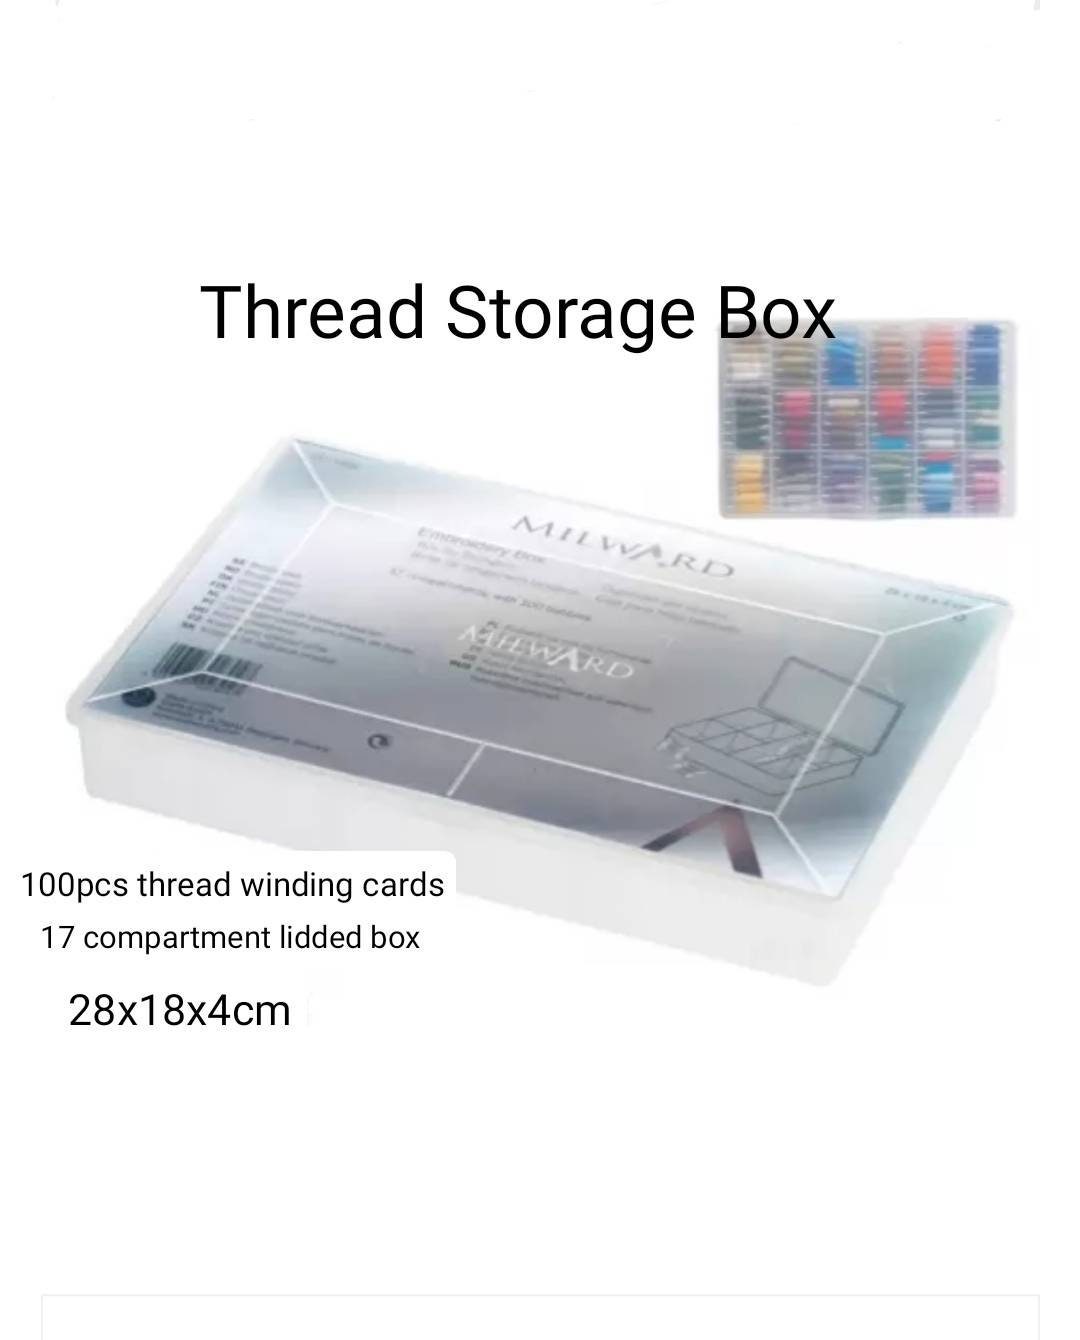 Embroidery Floss Organizer Box  17 Compartment Plastic Box with Lid, Embroidery  Thread Organizer with 100